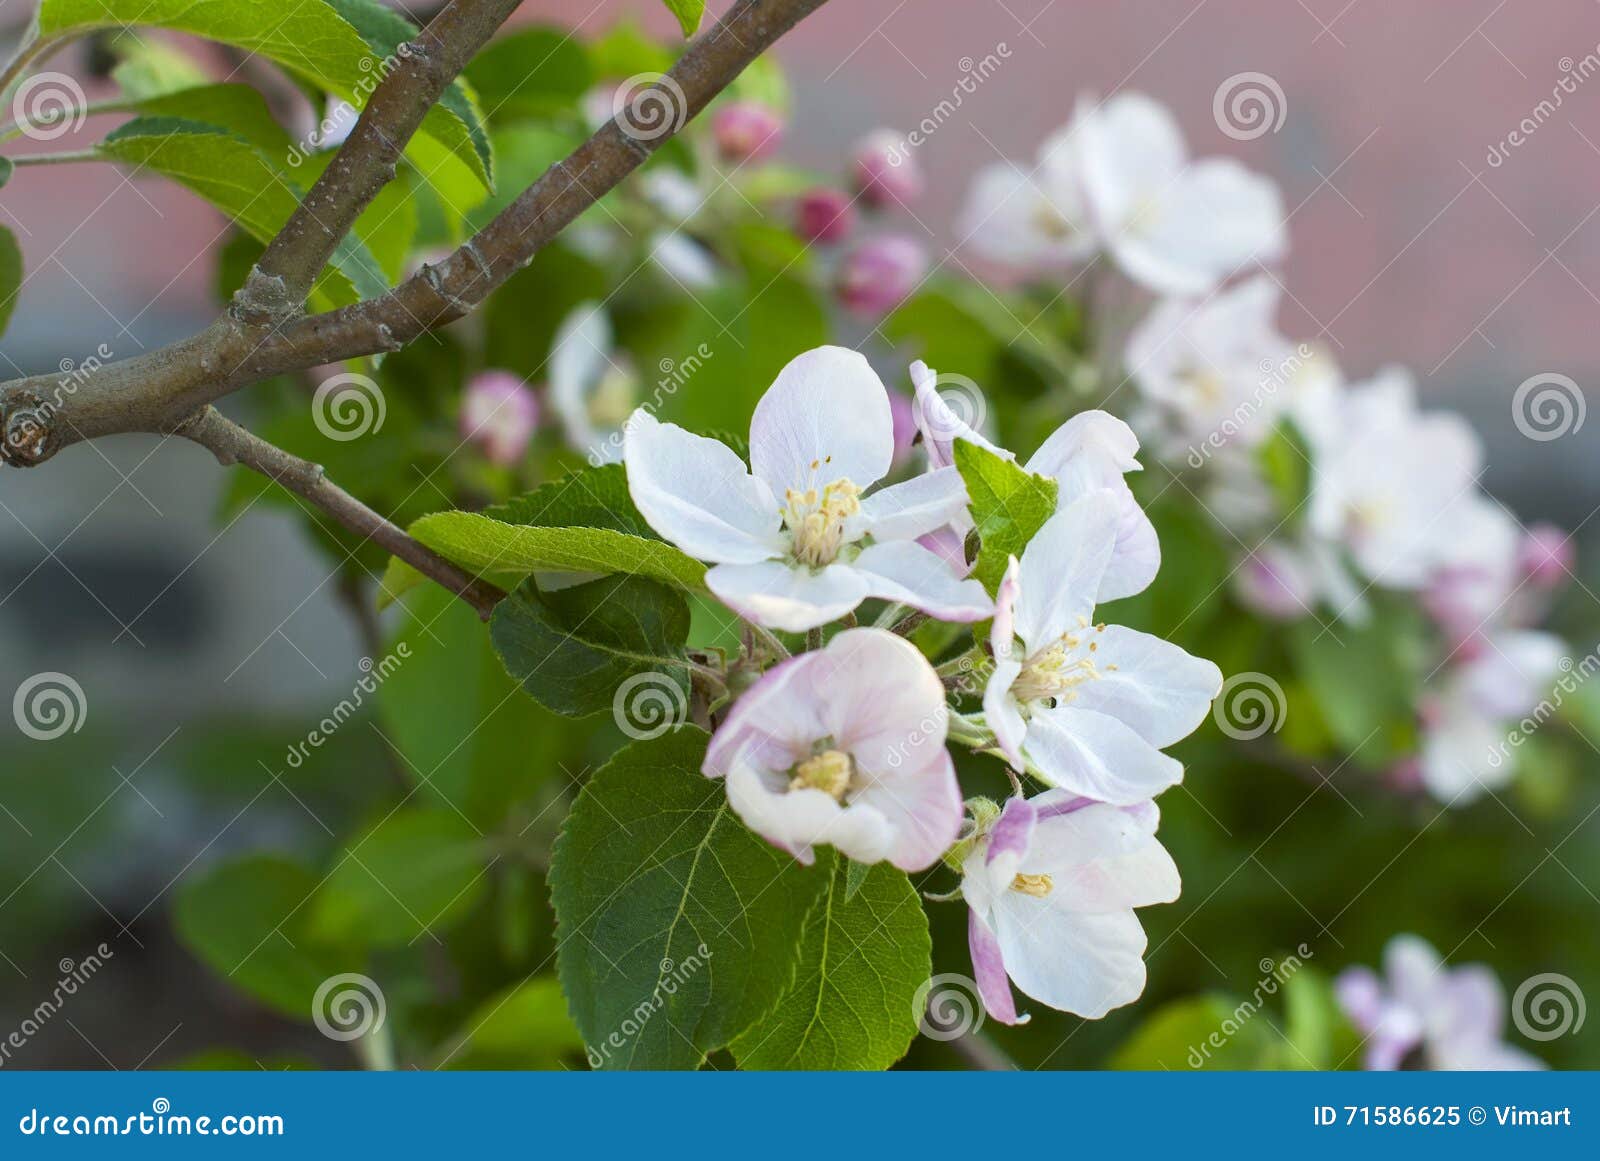 beautiful pink apple flowers in close up